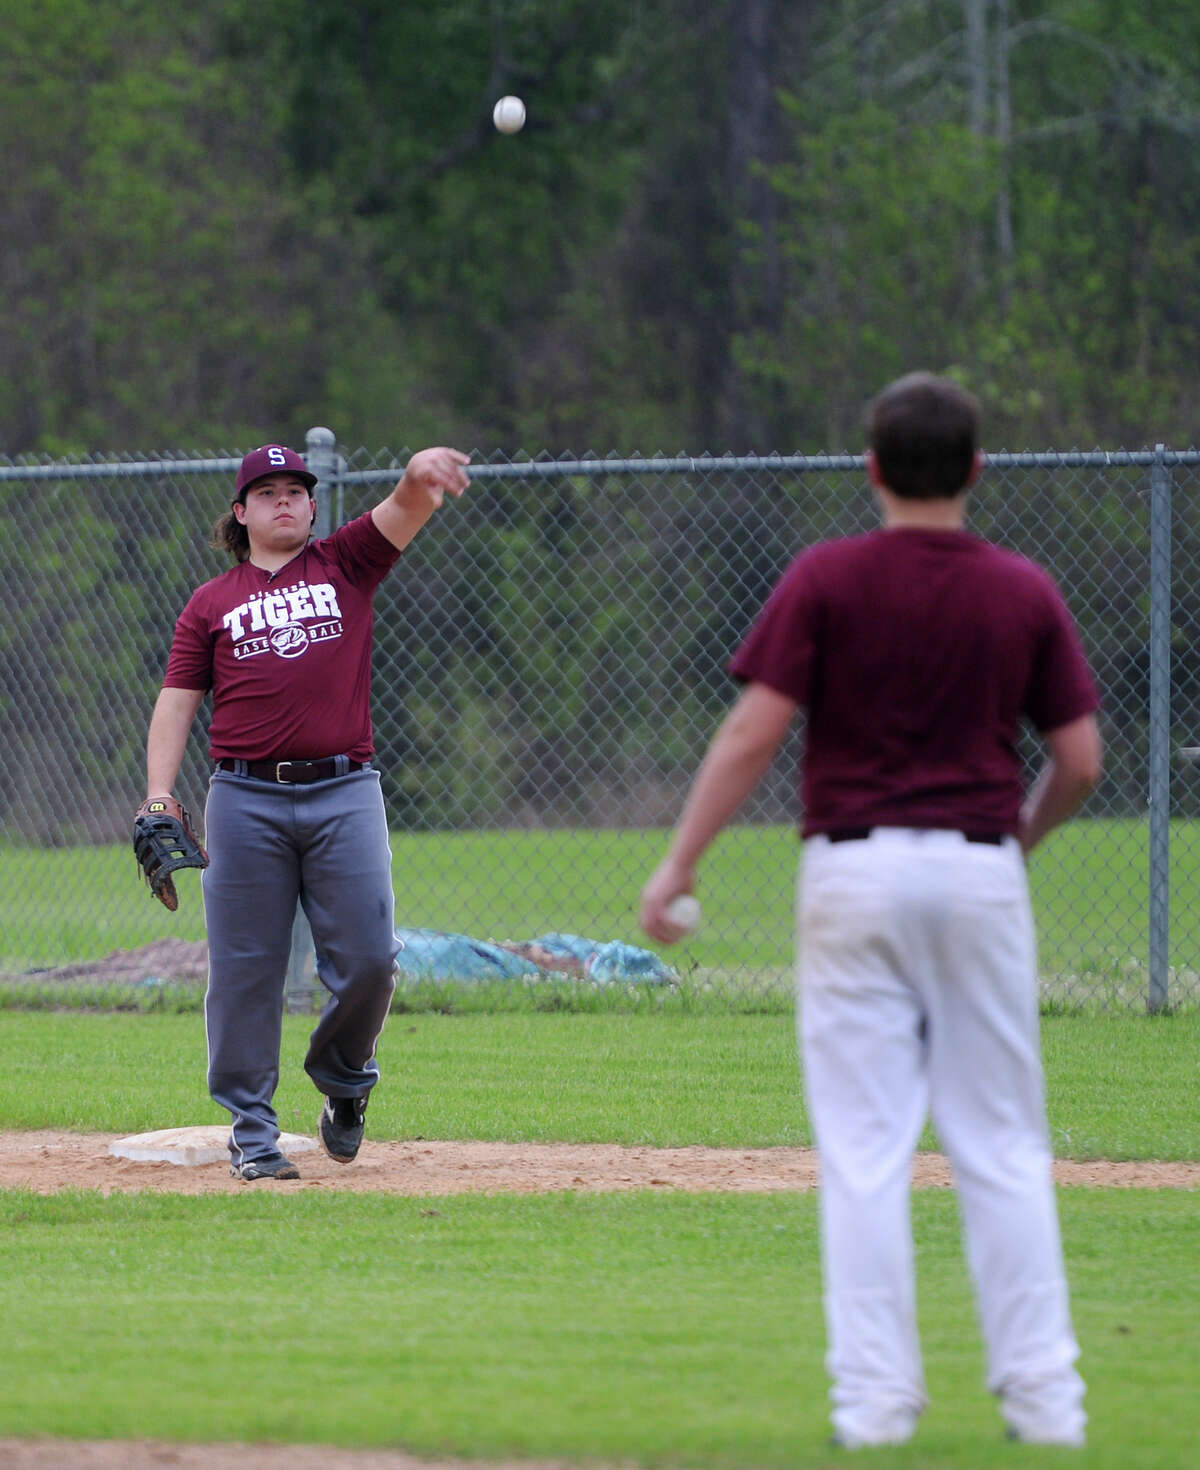 Brayden Griffin throws toward the pitcher's mound from first base during practice Thursday. The Silsbee High School baseball team practiced Thursday afternoon. Photo taken Thursday, 4/3/14 Jake Daniels/@JakeD_in_SETX